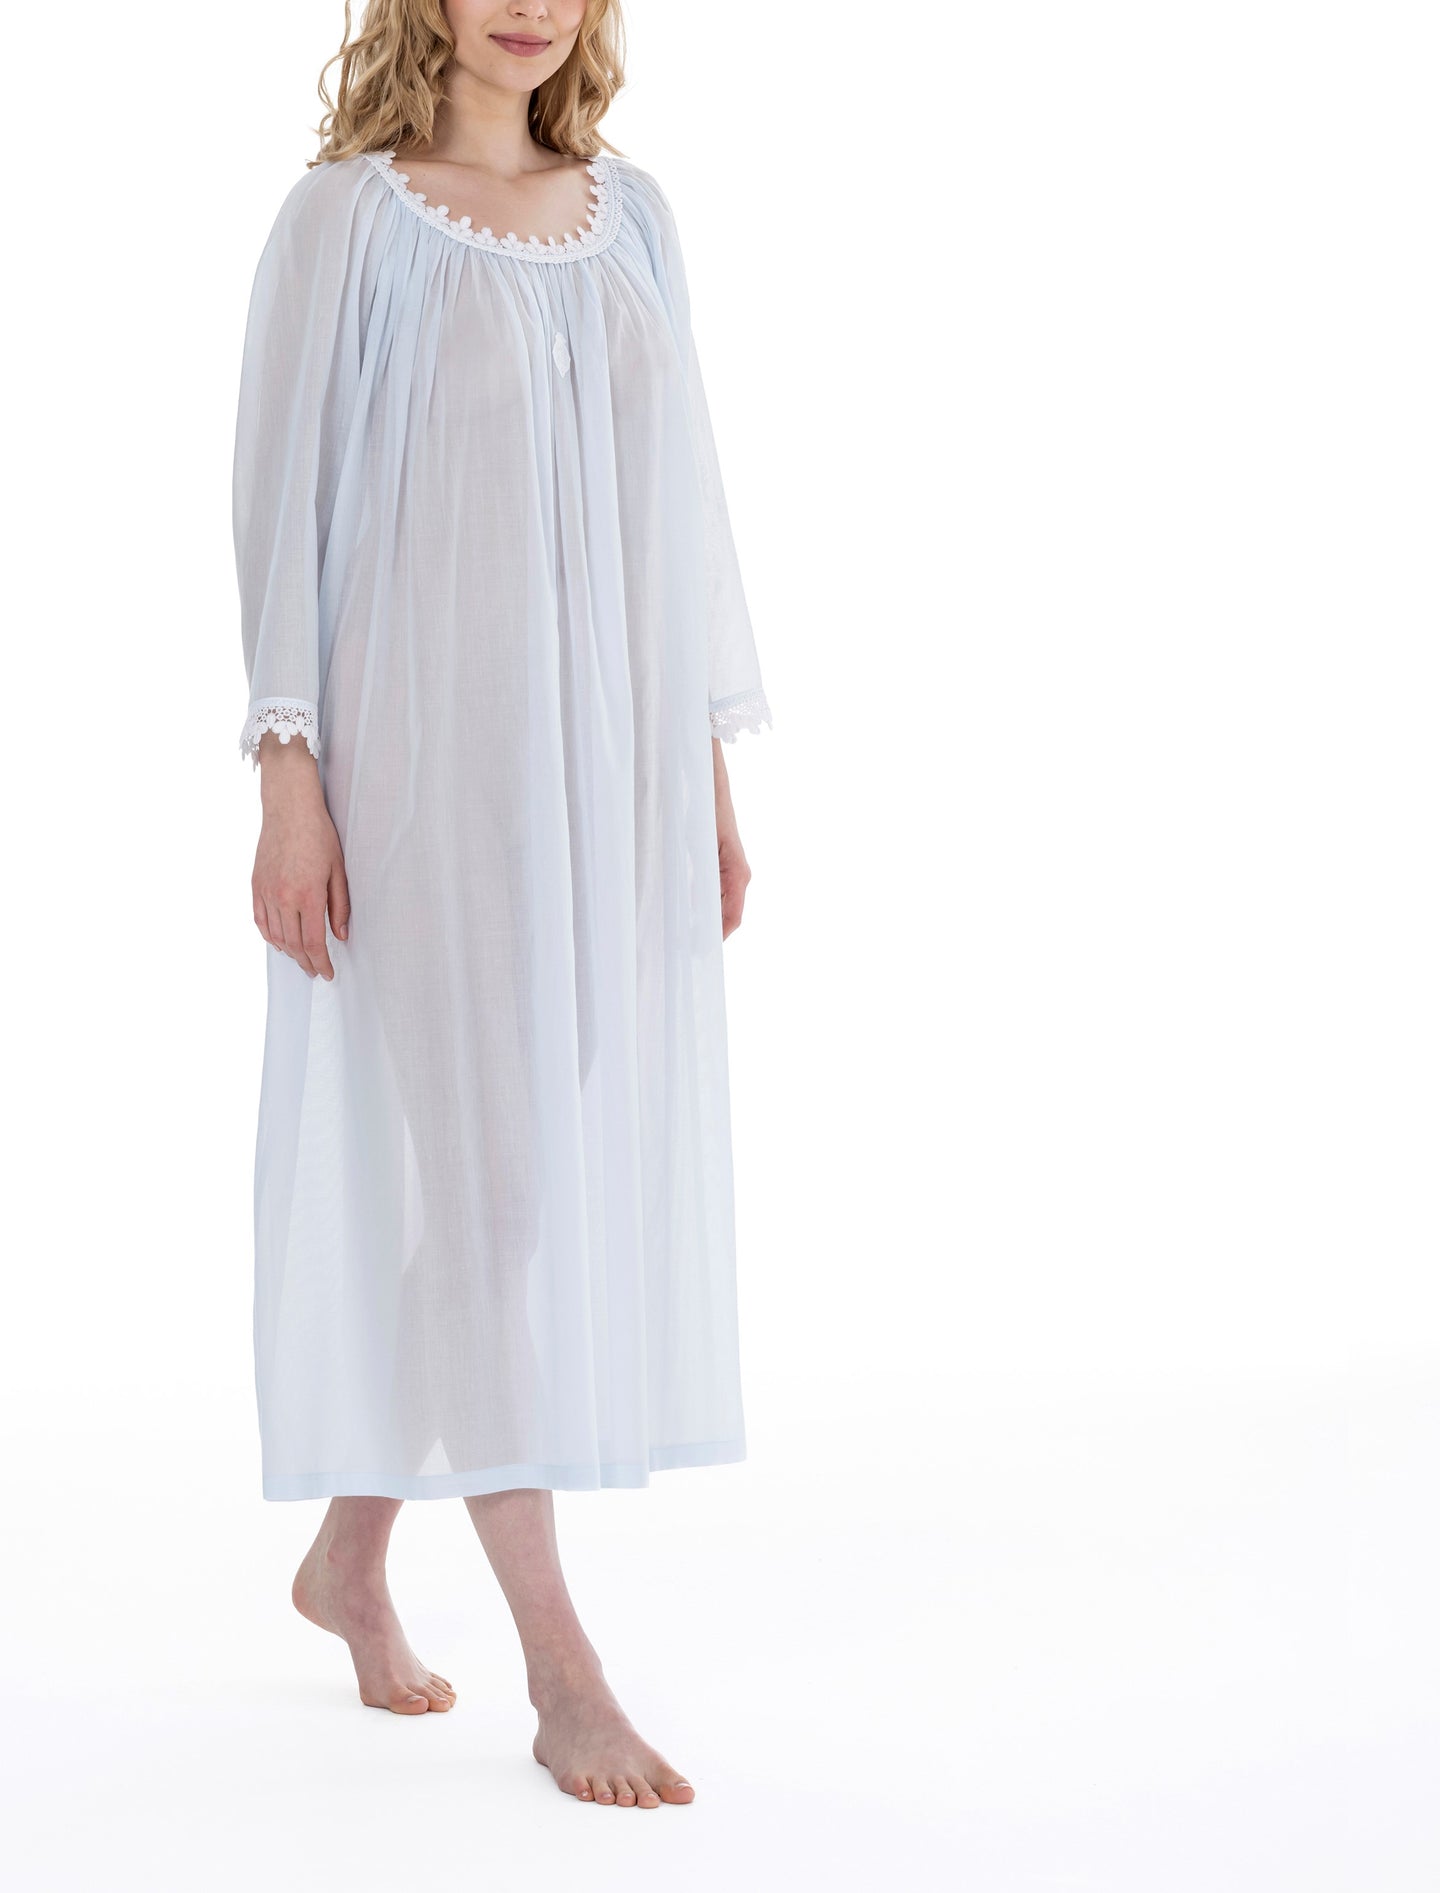 Azure Full Length (126cm) long sleeve nightgown. Lace details on gently rounded neckline and sleeve cuff. Flared skirt for ease of movement when sleeping. Made in Germany from the finest pure Swiss cotton, Celestine nightdresses are diaphanous, offering perfect sleep without heaviness. Celestine nightwear, dressing gowns and short robes drop from the shoulder, therefore one size fits all.  Fabric composition:  100% Pure Swiss Cotton. 100% Guipure Cotton Lace. Machine Washable.